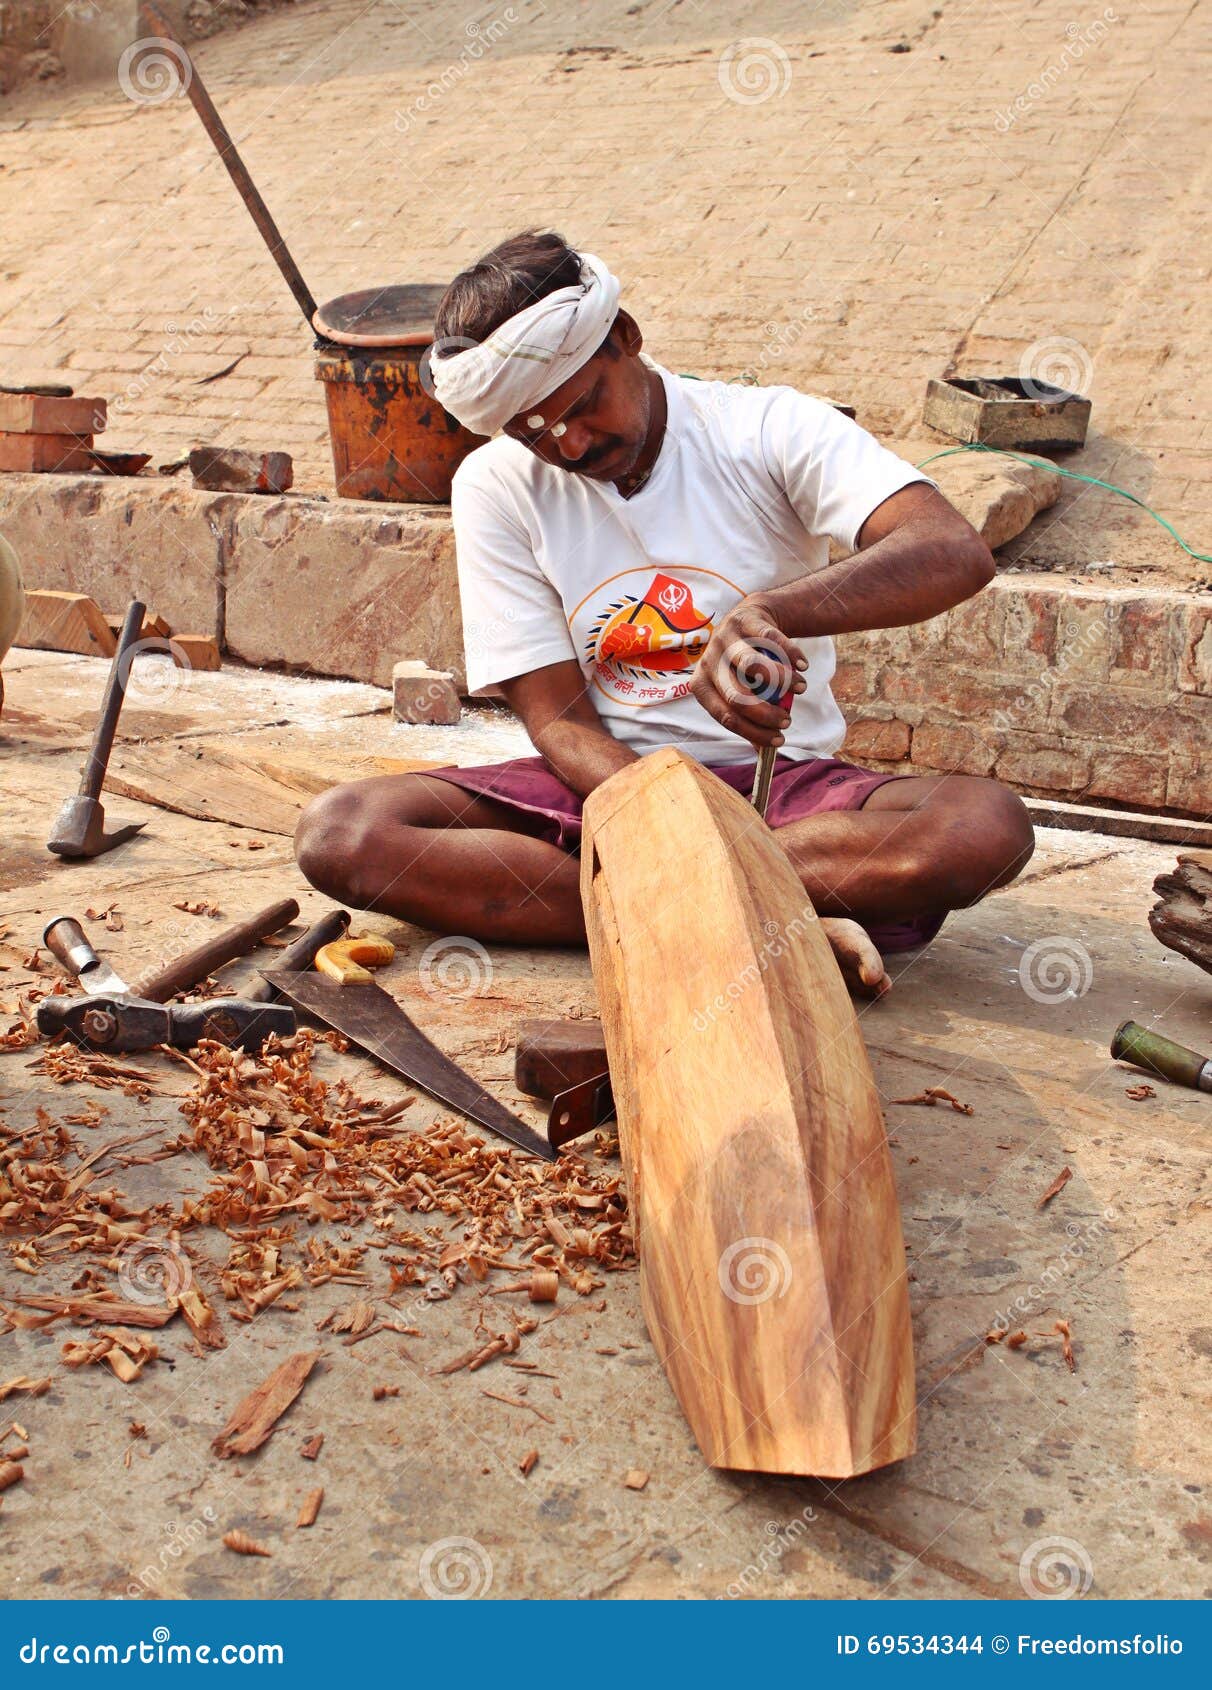 A Local Carpenter Making Wooden Boat India Editorial Stock Image Image Of Street Earn 69534344